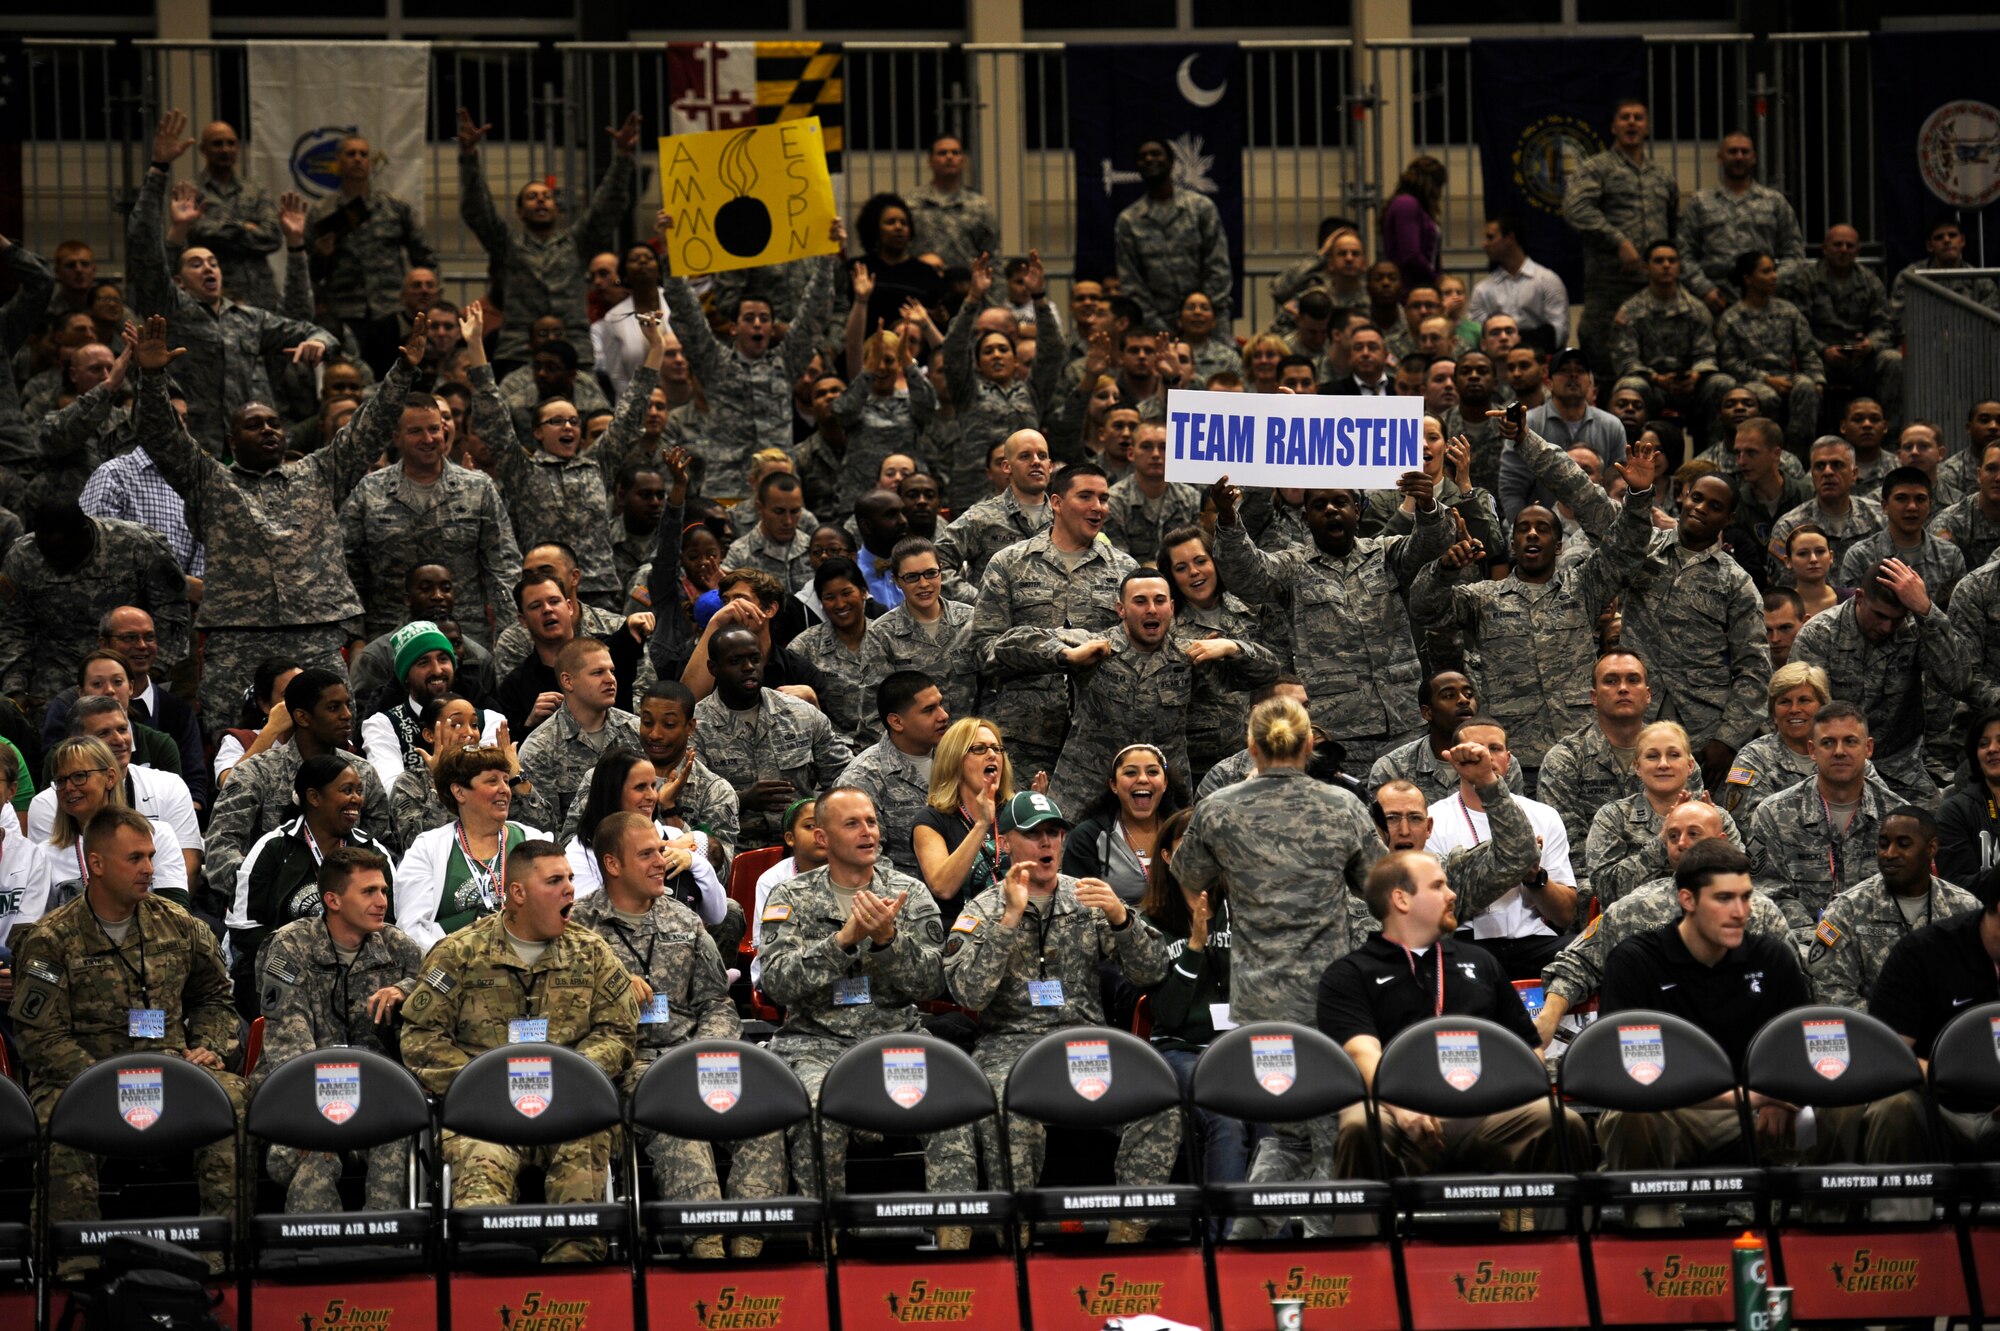 Airmen cheer during the 2012 Armed Forces Classic on Ramstein Air Base, Germany, Nov. 10, 2012. The match-up between Michigan State University and University of Connecticut is part of ESPN's Veteran's week initiative to honor the men and women who have served and are still serving in the U.S. military. (U.S. Air Force photo/Senior Airman Aaron-Forrest Wainwright)